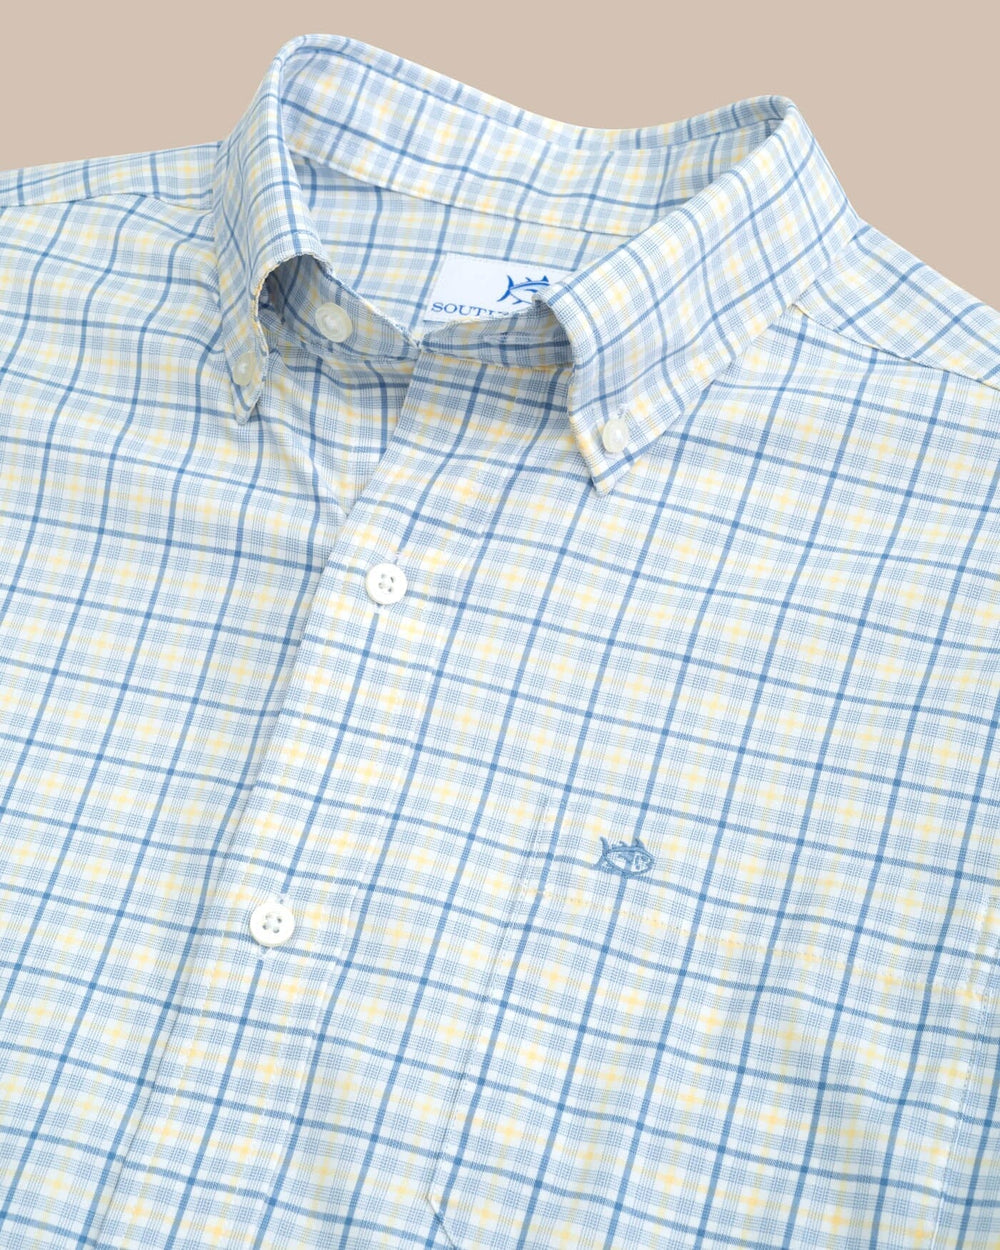 The detail view of the Southern Tide Intercoastal Falls Park Plaid Long Sleeve SportShirt by Southern Tide - Coronet Blue